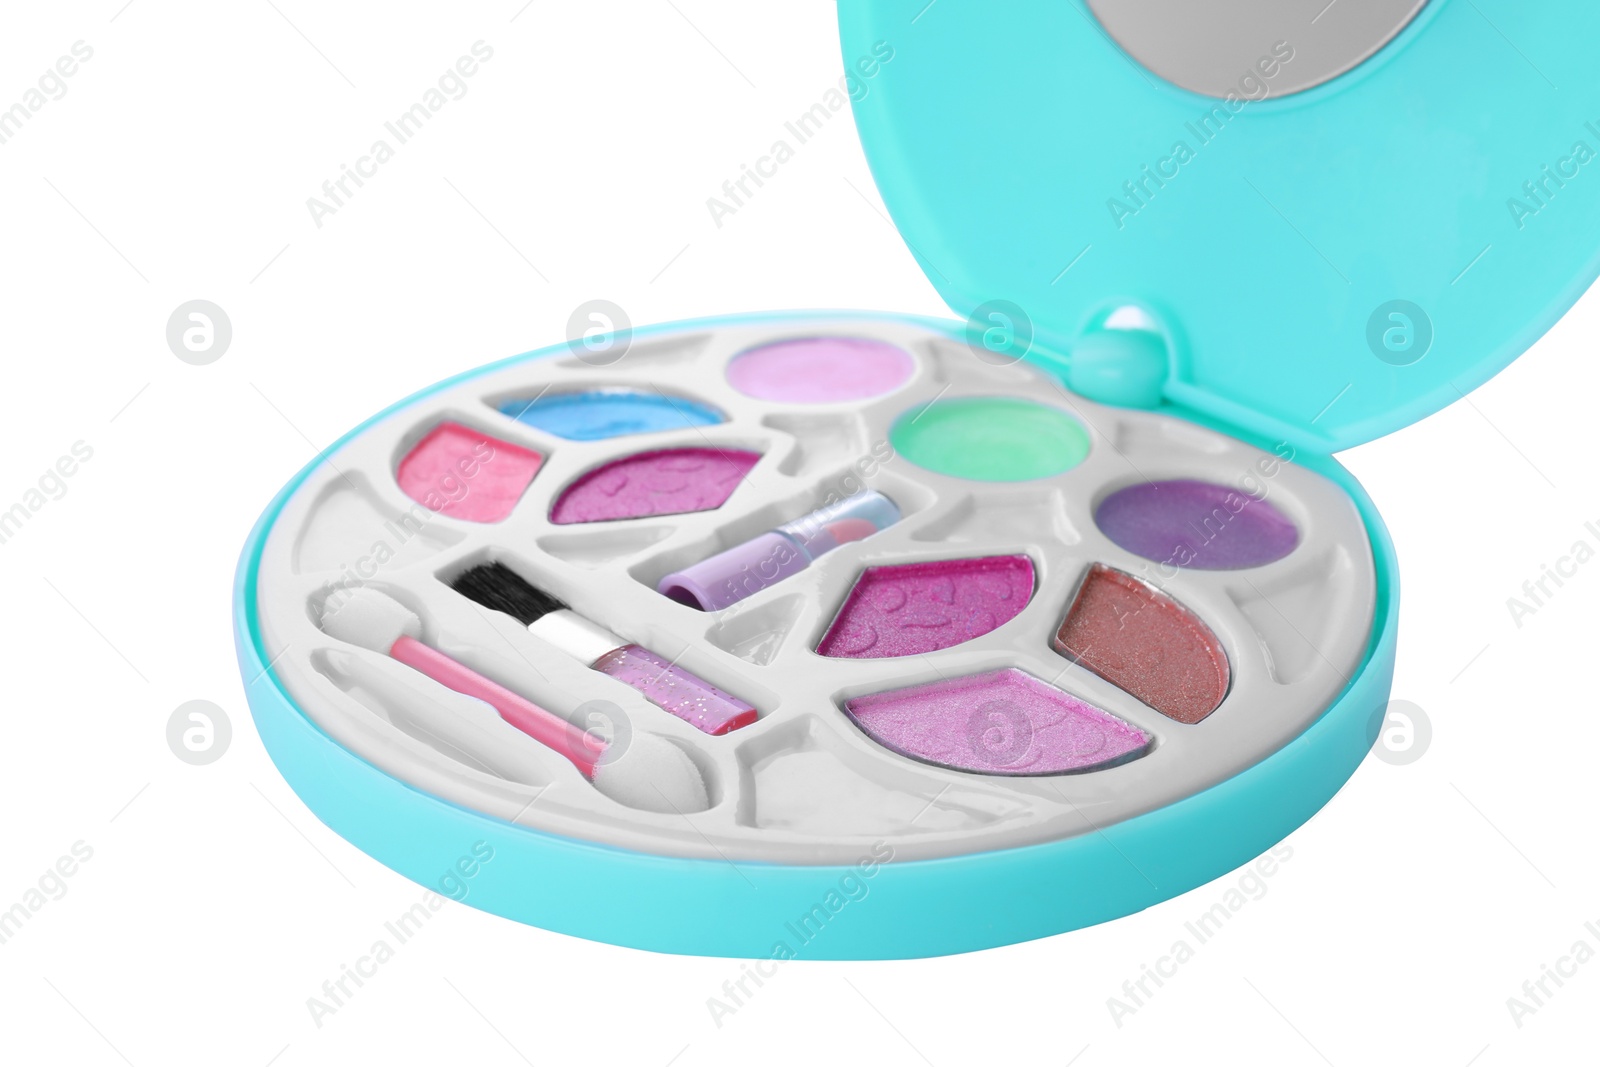 Photo of Children's kit of decorative cosmetics isolated on white